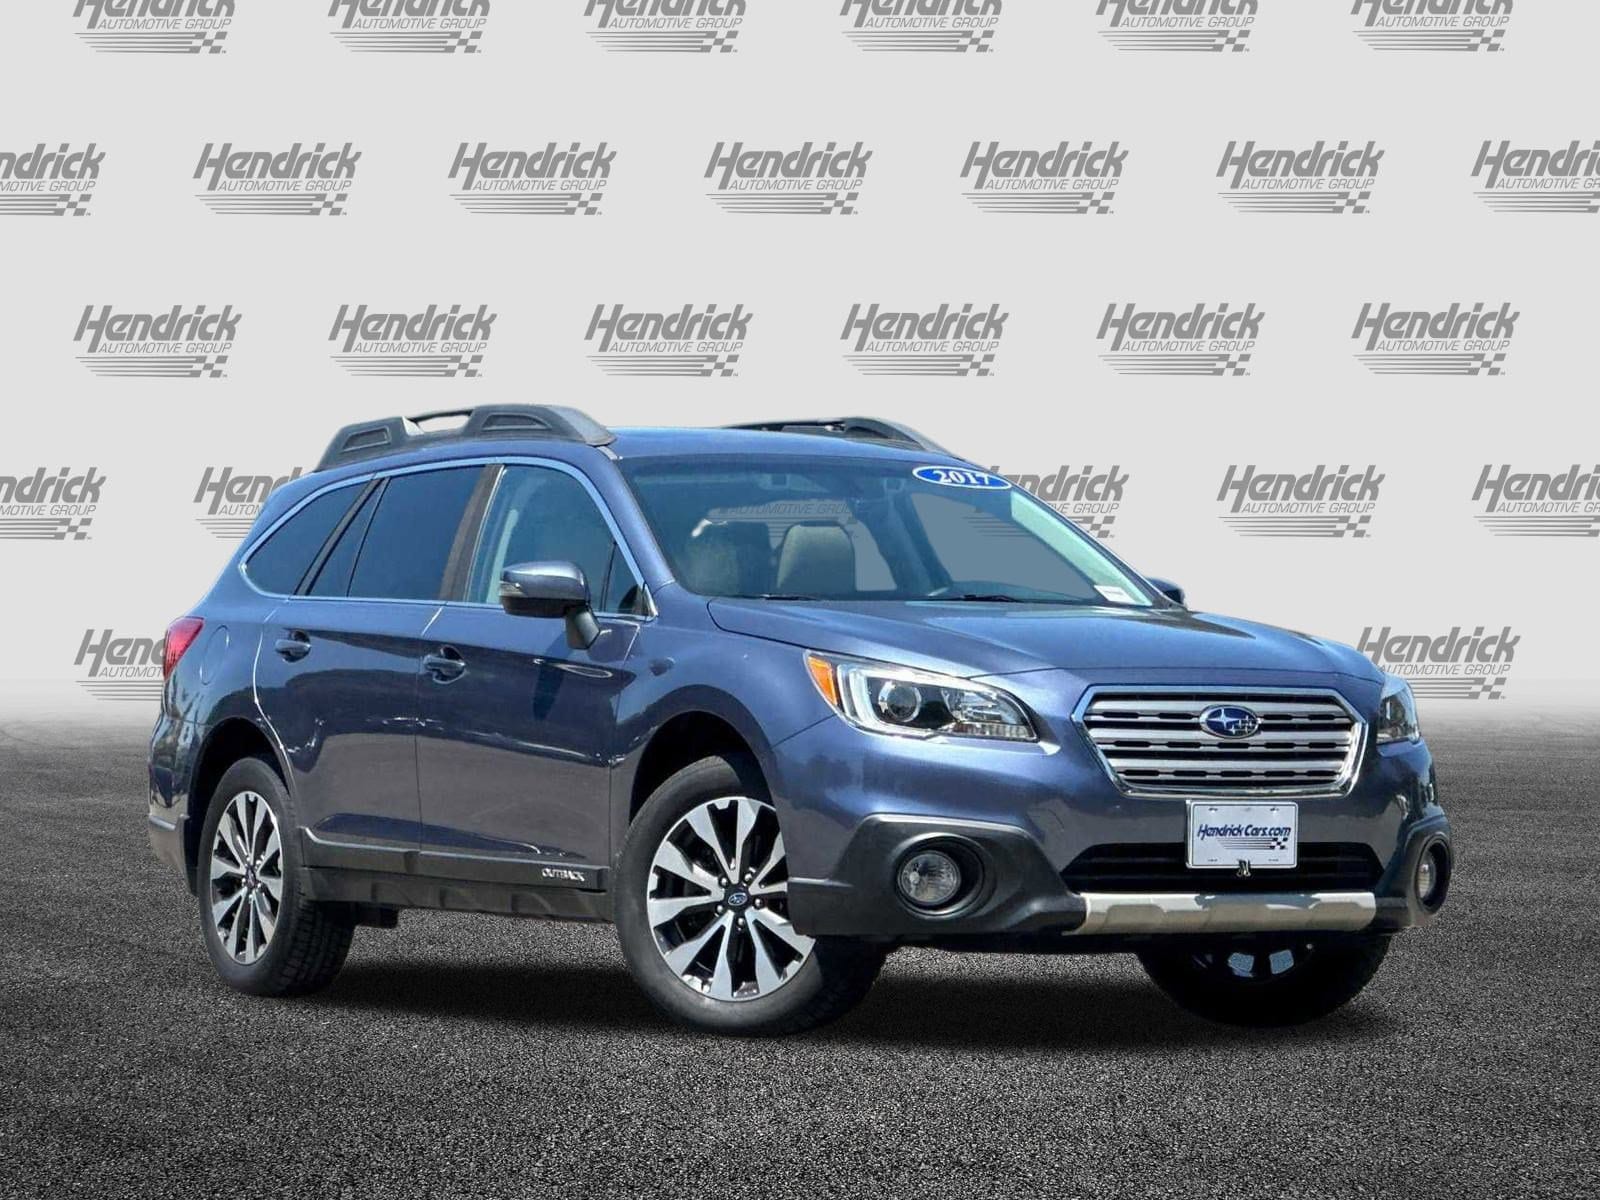 Used 2017 Subaru Outback Limited with VIN 4S4BSANCXH3391093 for sale in Pleasanton, CA